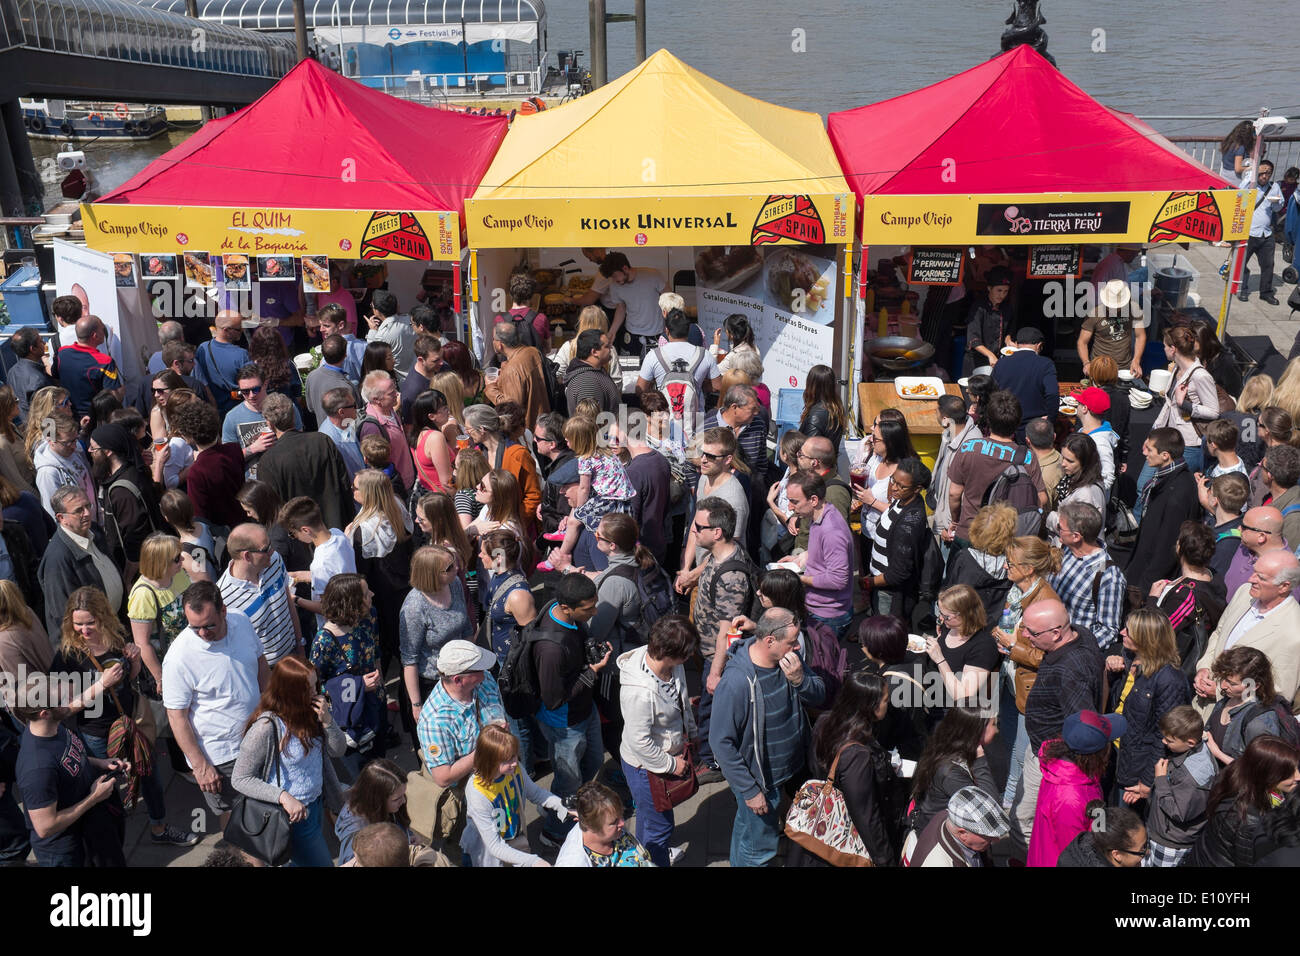 Spanish Food Festival Crowd on the South Bank in London England Stock Photo